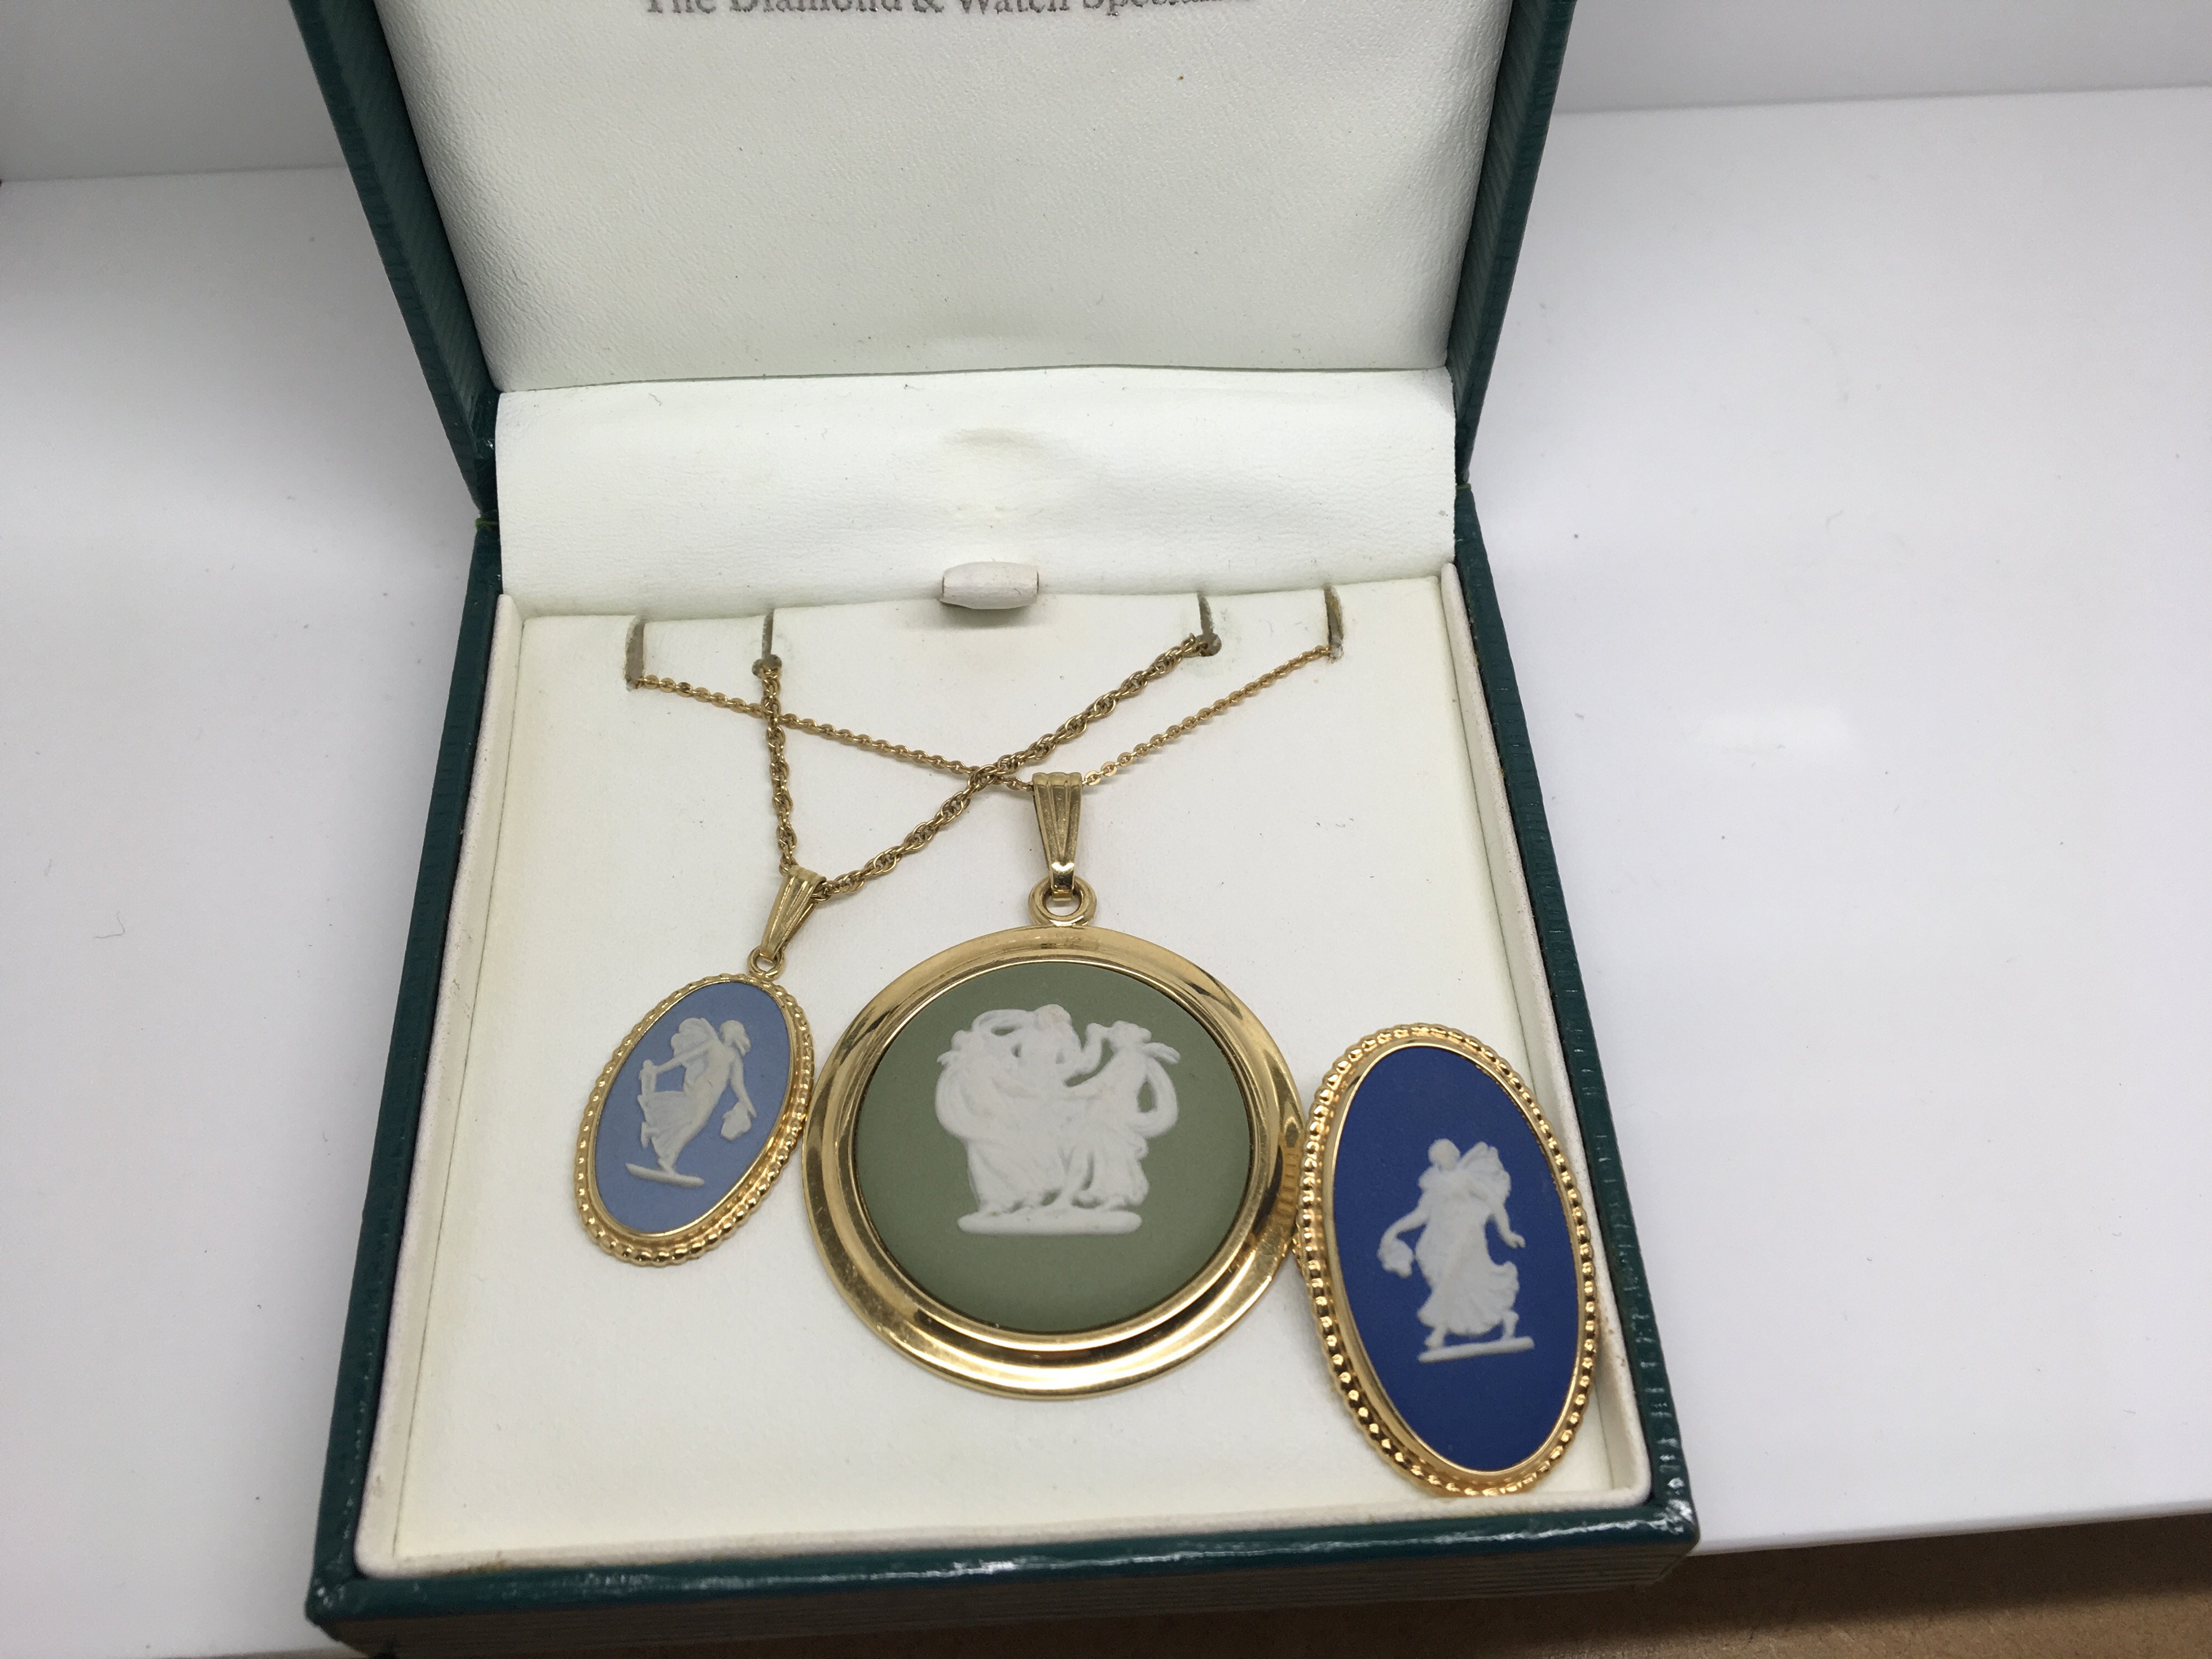 Two Wedgwood cameo necklaces together with a brooch.